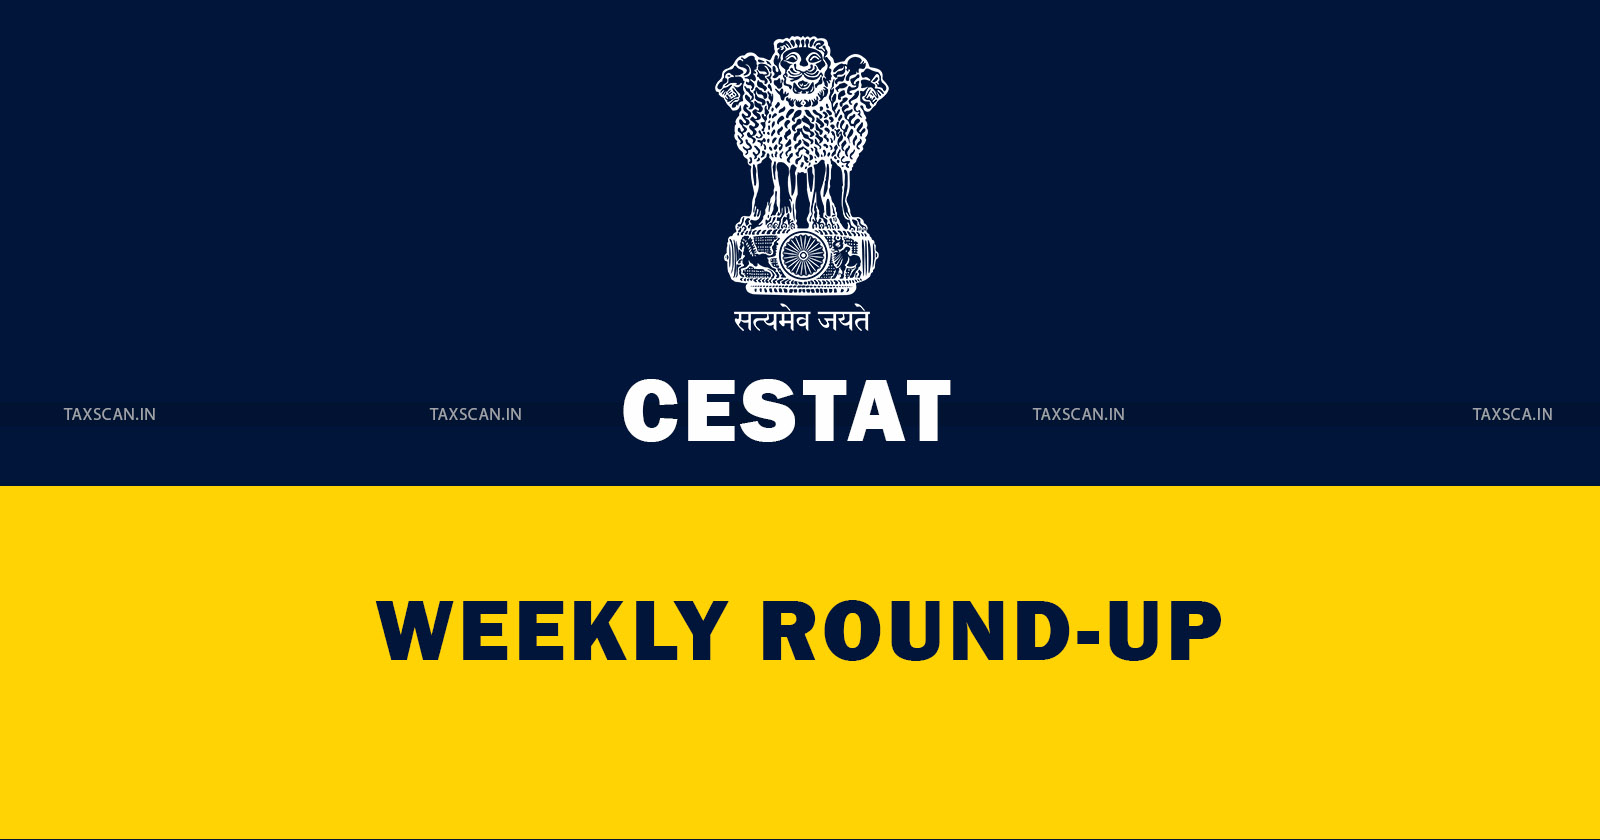 CESTAT-Weekly-Round-Up - TAXSCAN